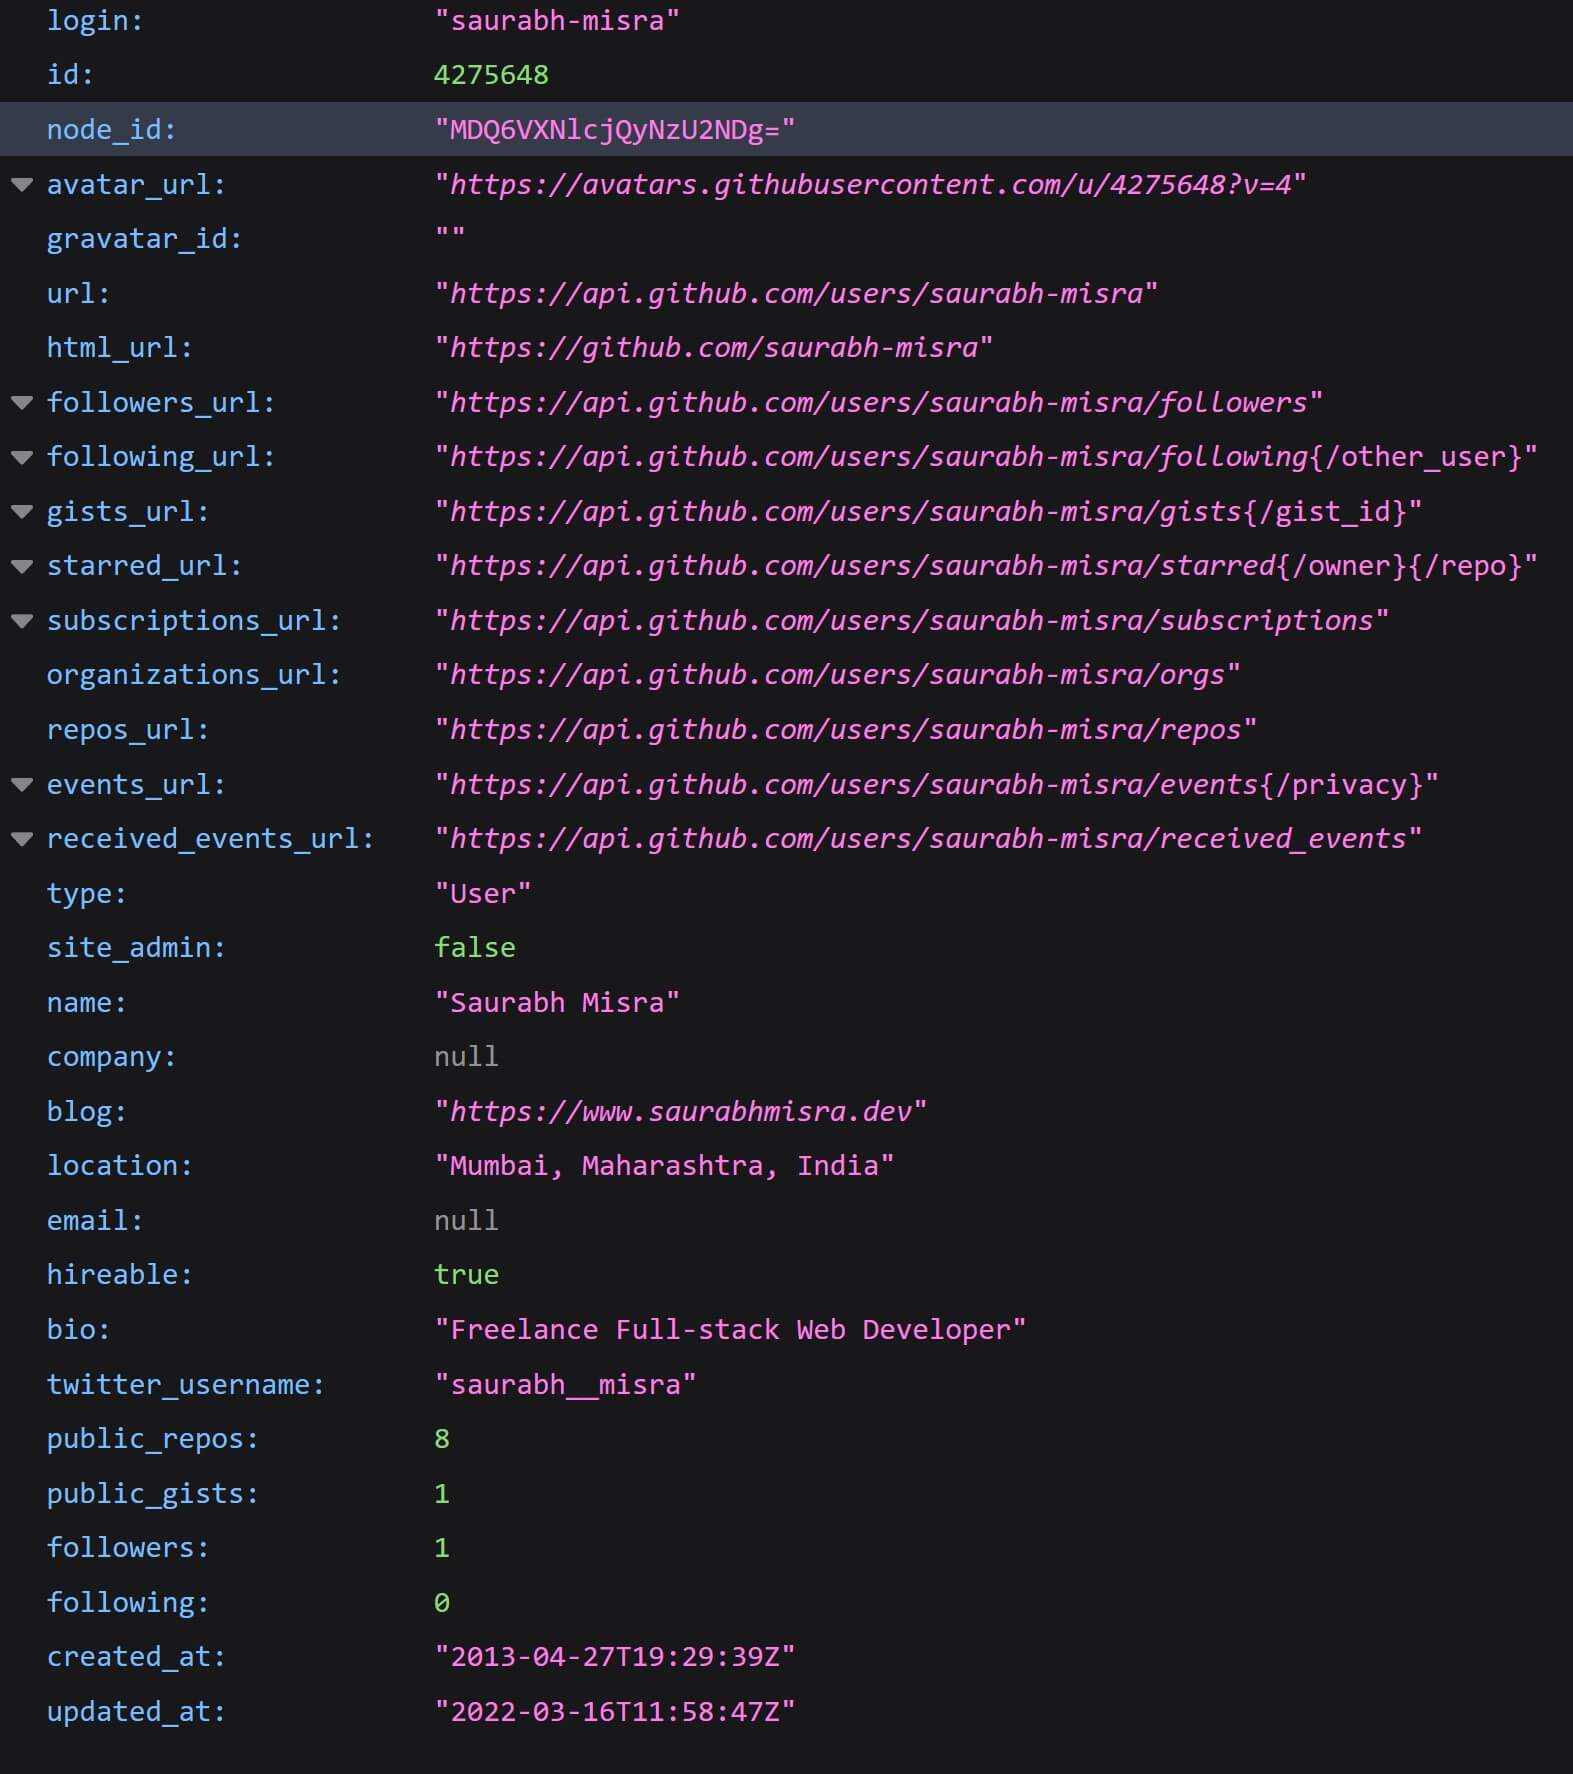 screenshot of the JSON response from the Github user profile API service